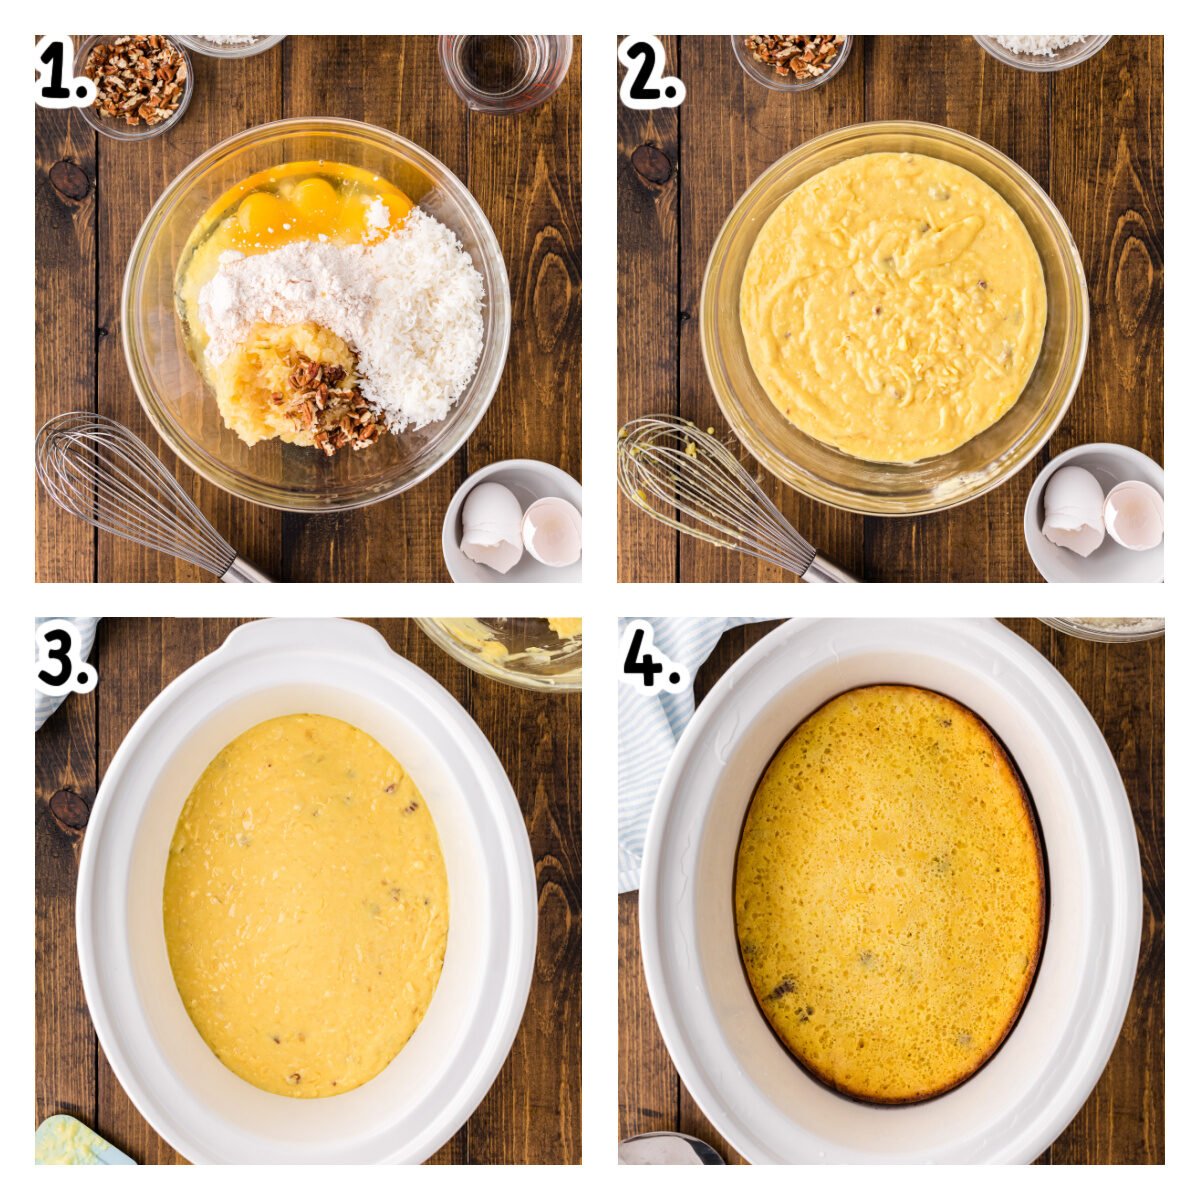 Four images showing how to make coconut cake in the slow cooker.